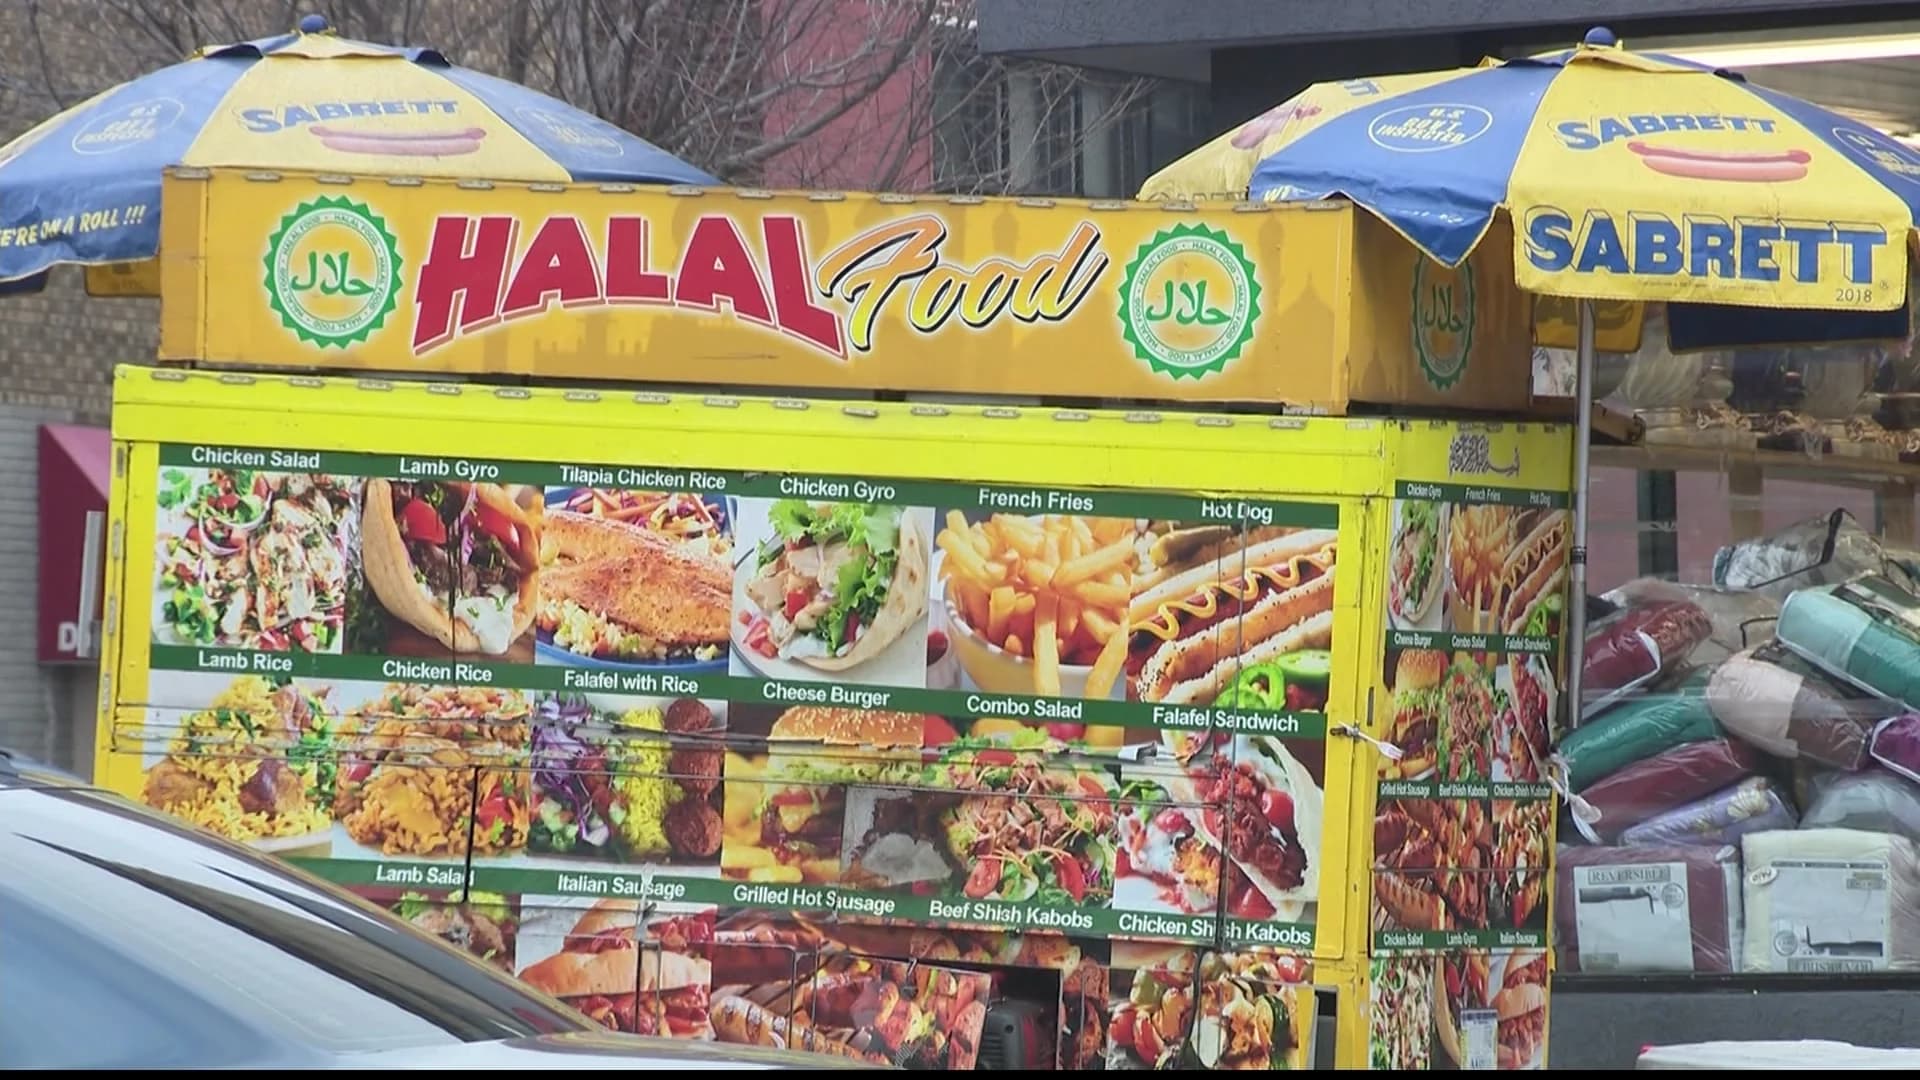 City Council approves bill to expand street vending permits